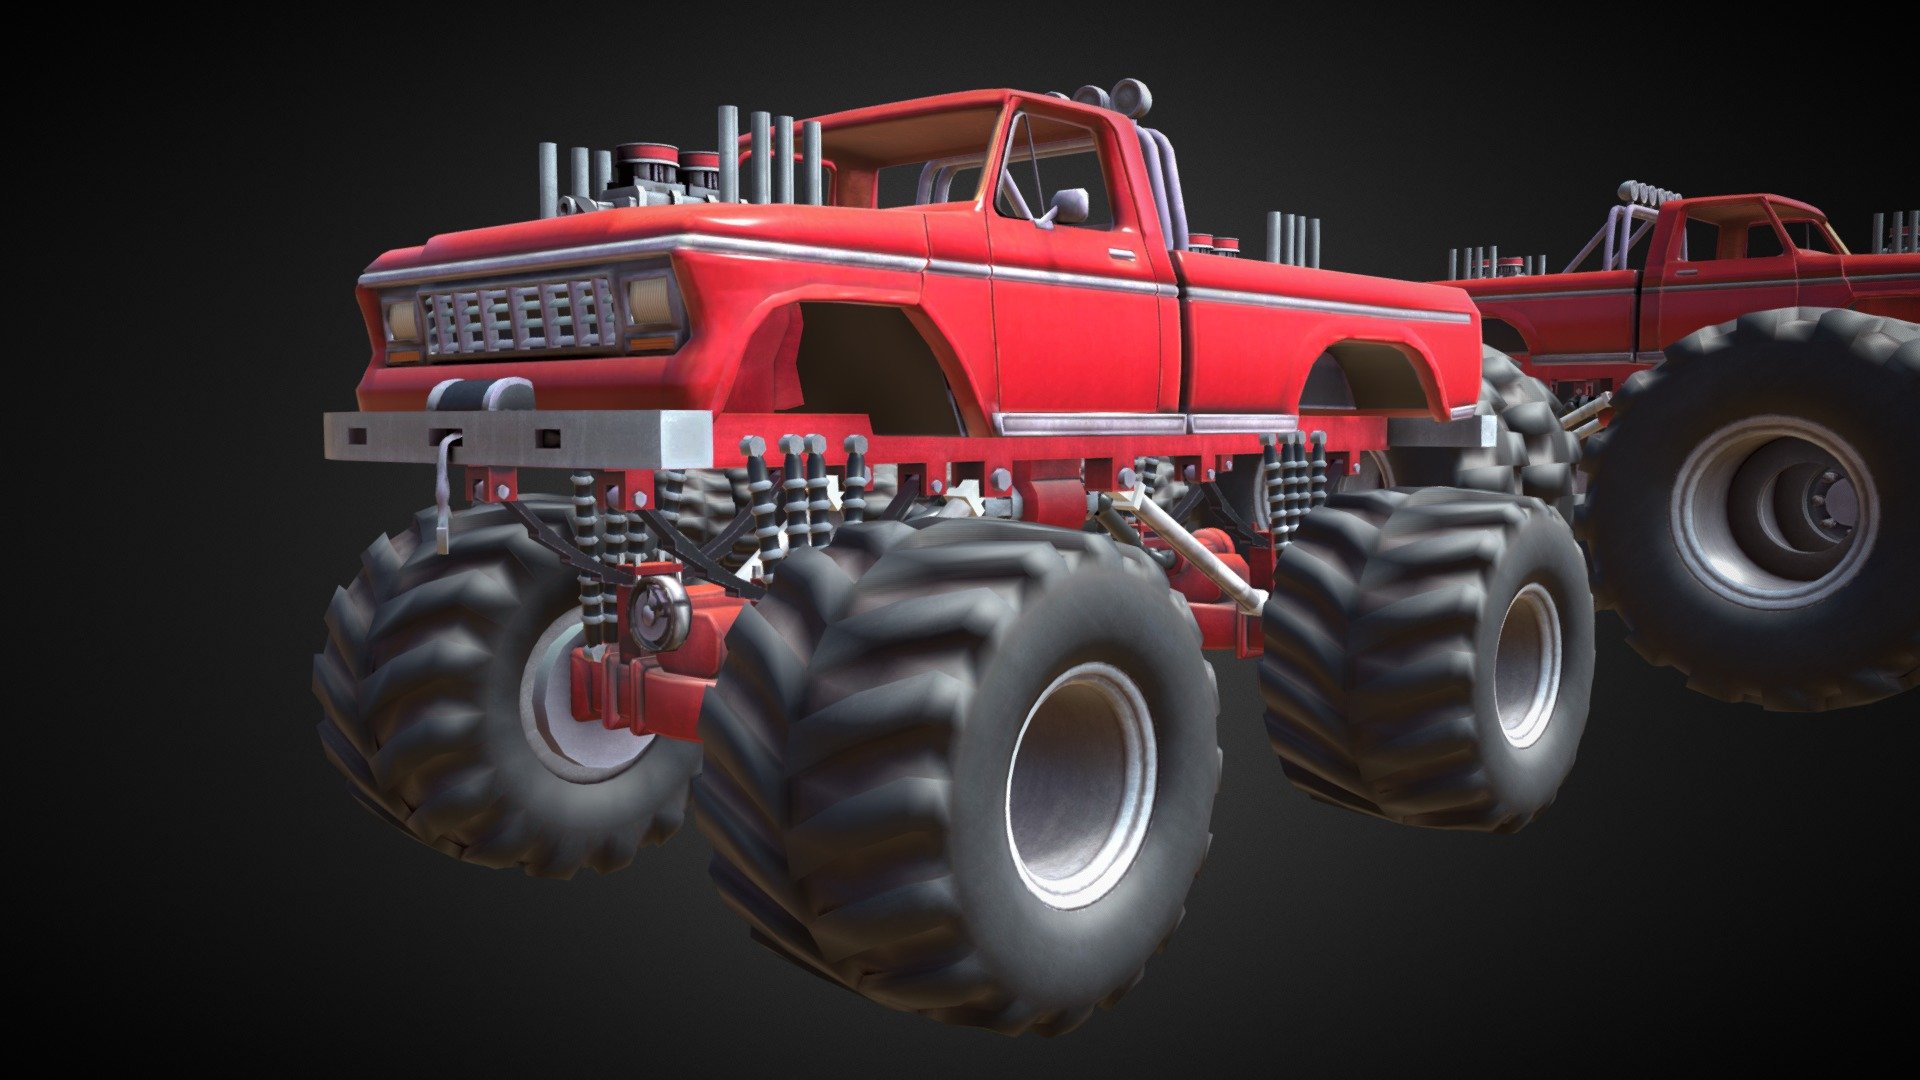 If you like this, consider buying updated chassis with much better textures and much more detailed axles. It is made for modern standards, and good enough for commercial games:

https://sketchfab.com/3d-models/monster-truck-chassis-47221822252247df81af228b44f11c67

This was made for two week school project for which I was sole developer

Three days of work, progress can be seen in models I uploaded yesterday and day before

First day: https://sketchfab.com/3d-models/old-school-monster-truck-f20f4cd1f85e4b12ba26d7c275f9ec32https://sketchfab.com/3d-models/old-school-monster-truck-f20f4cd1f85e4b12ba26d7c275f9ec32

Second day: https://sketchfab.com/3d-models/stage-one-and-two-monster-truck-variations-baab30c85ed146f7a62c1e04b21d4fb8 - [Monster Truck Game] Bootleg Bigfoot - Download Free 3D model by Jorma Rysky (@Rysky) 3d model